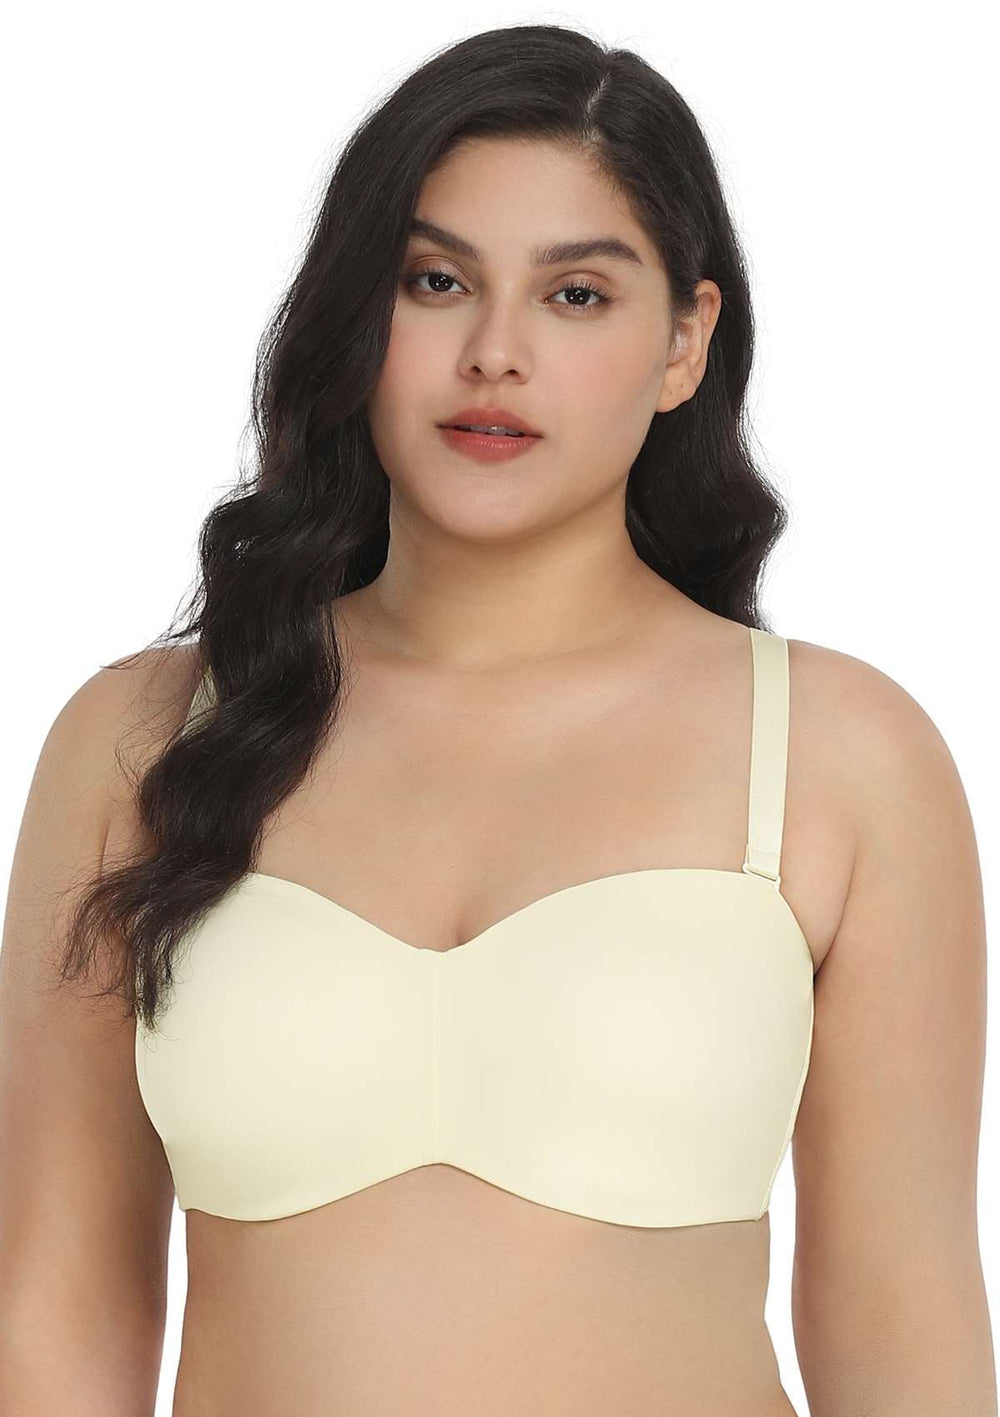  Womens Strapless Bra Silicone-Free Minimizer Bandeau Plus  Size Unlined White 32G